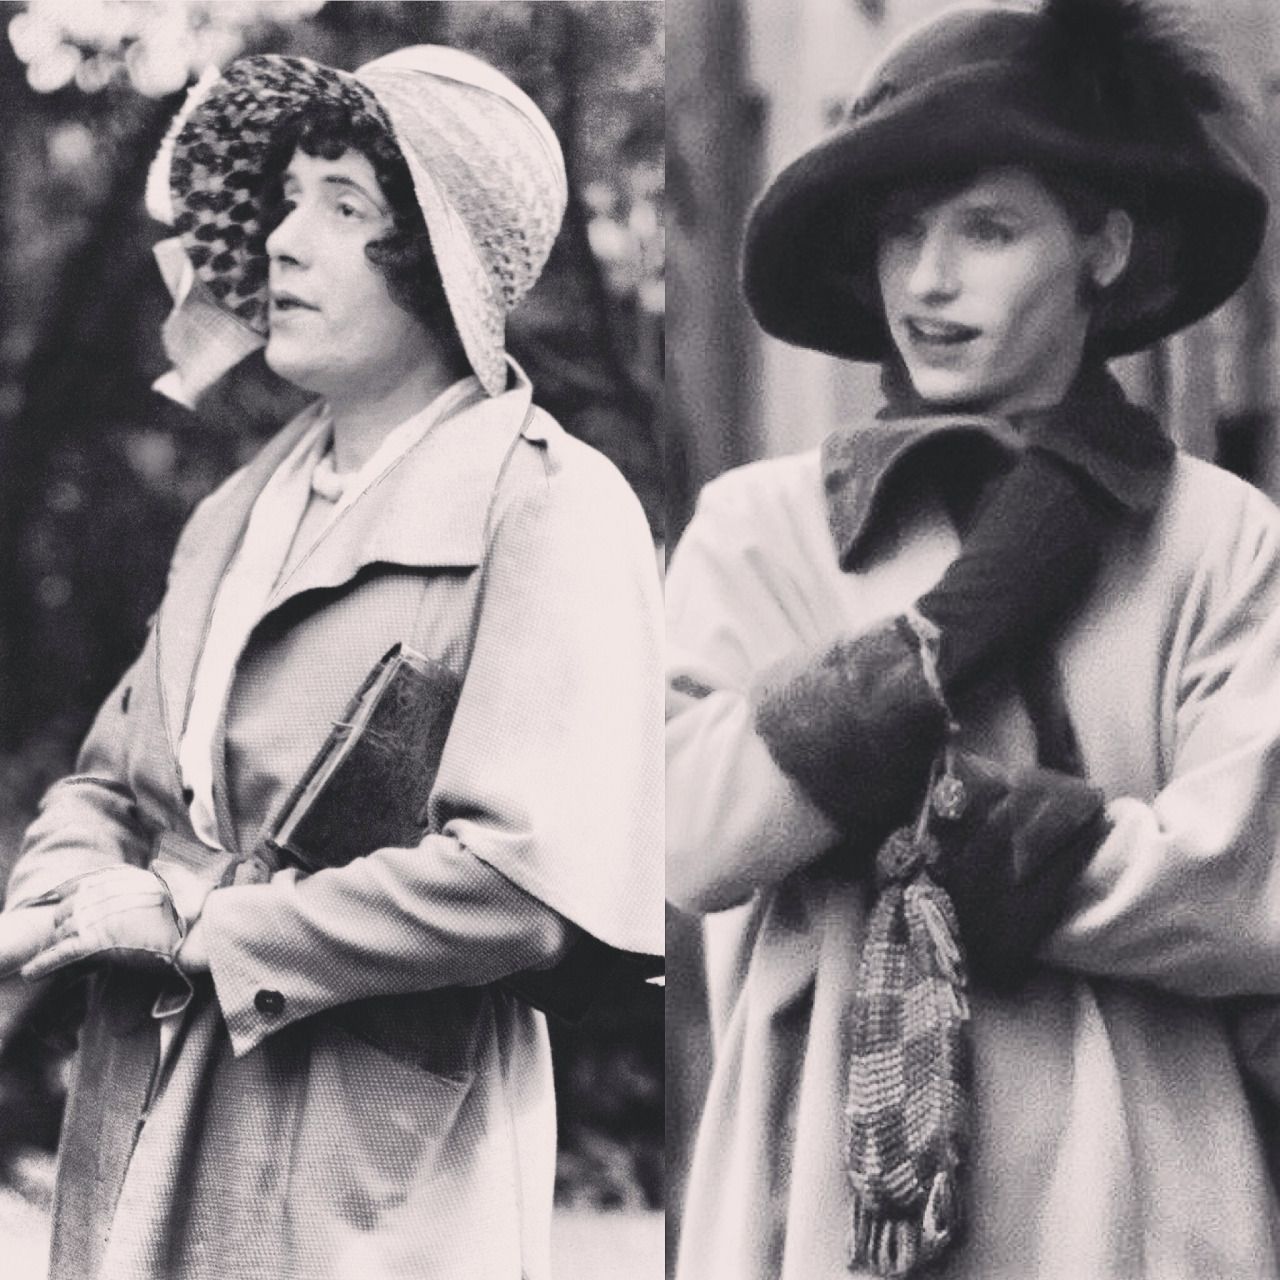 RESPECTFUL PORTRAYAL: The real Lili Elbe and Eddie Redmayne in costume as Elbe for The Danish Girl location filming. Danish girl movie, The danish girl, Lili elbe